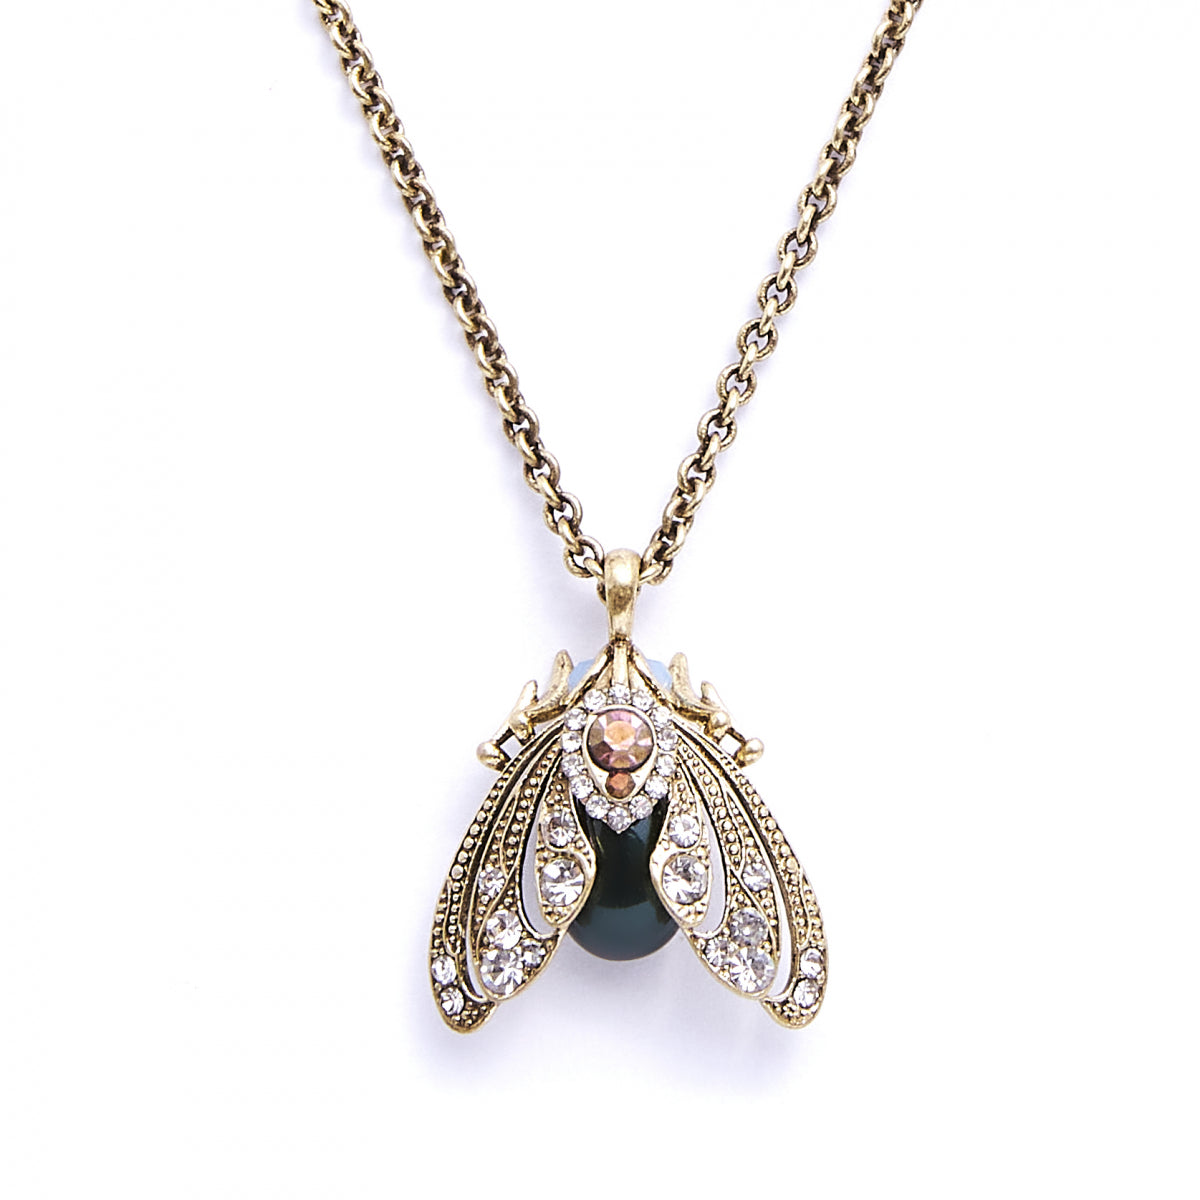 Moth pendant with chain from Bill Skinner